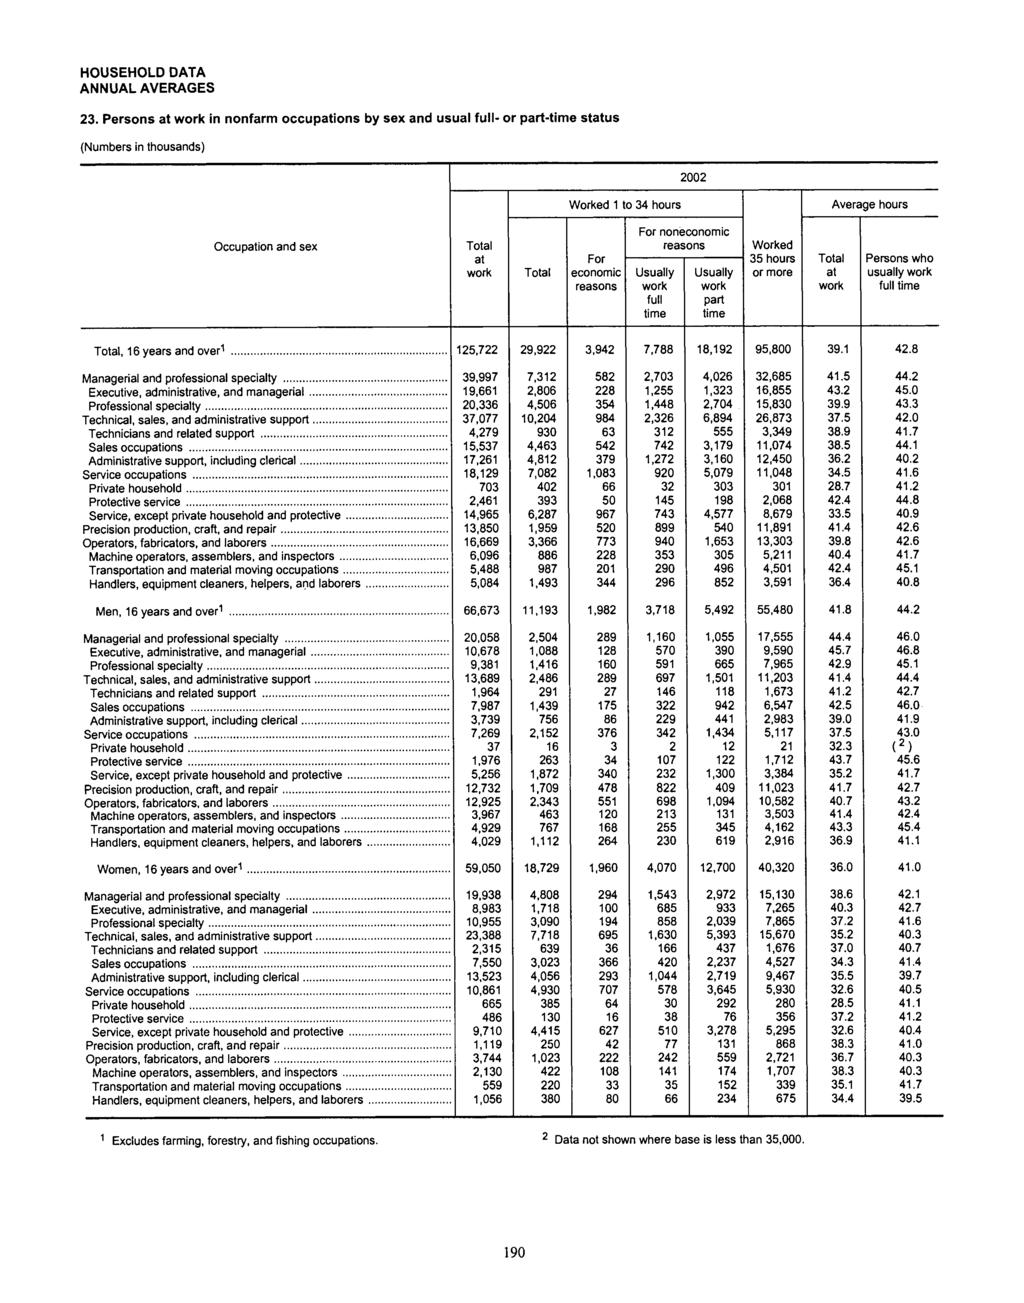 (Numbers in thousands) Worked 1 to 34 hours Average hours Occupation and sex Total at work Total For economic reasons For noneconomic reasons Usually work full time Usually work part time Worked 35